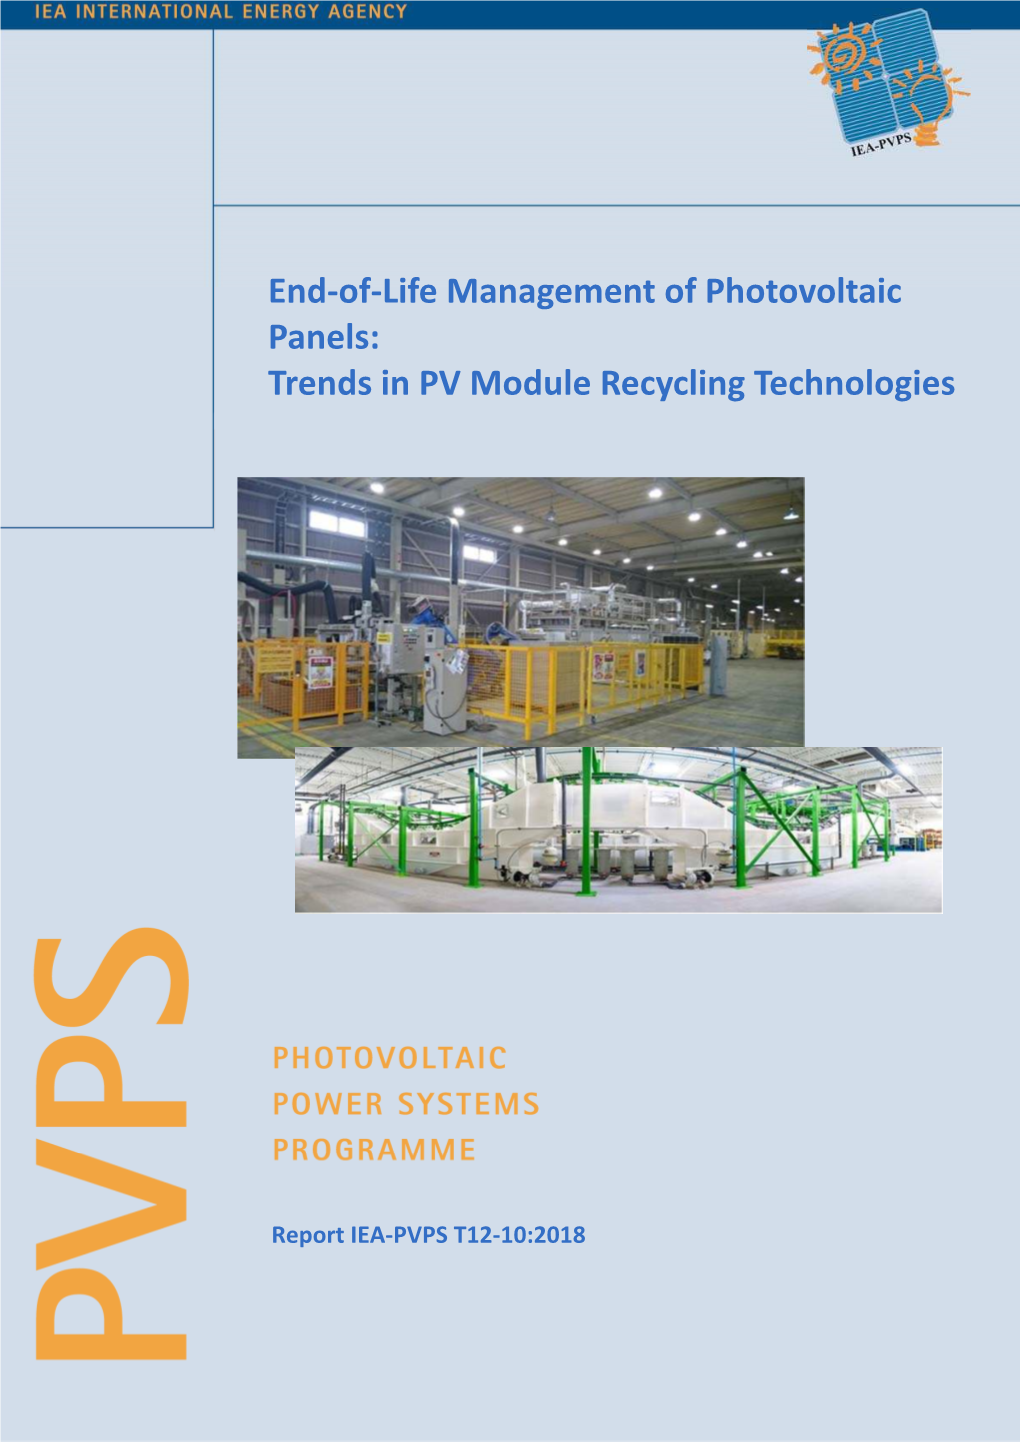 End-Of-Life Management of Photovoltaic Panels: Trends in PV Module Recycling Technologies